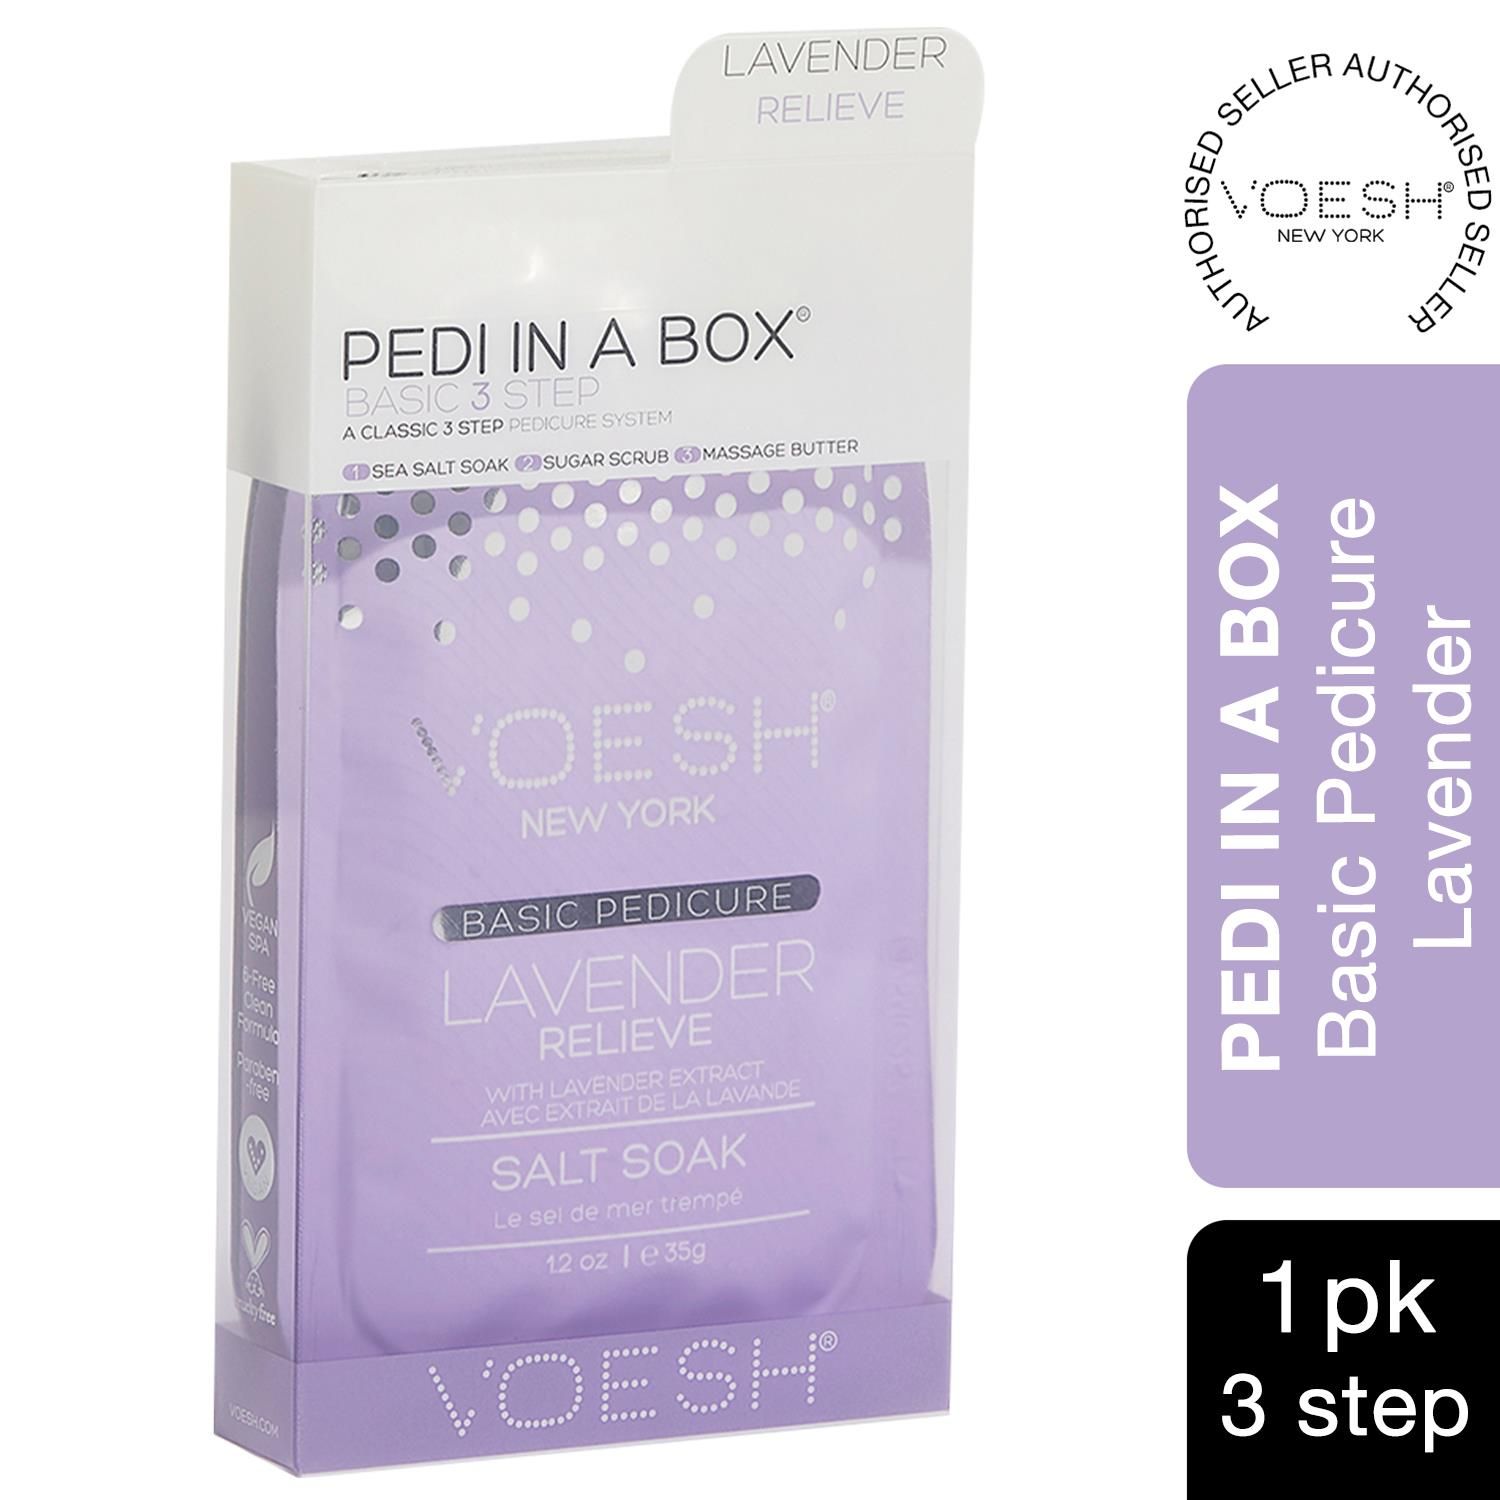 Voesh Lavender Relieve Deluxe 3 Step Pedi In A Box with Lavender Extract. Voesh individual spa pedicure collection is a 3 step treatment. The cleanest and most hygienic Spa Pedicure solution. Enriched with key ingredients to give your feet the nutrition it needs. Each product is individually packed with the right amount for a single pedicure. Set Includes Sea Salt Soak, Scrub and Massage Cream.  

The Perfect Pedi For:
Everyday Pedicure Service
Clean & Hygienic Treatment

Key Features: 
The cleanest and most hygienic Spa Pedicure solution.
Enriched with key ingredients to give your feet the nutrition it needs.
Each product is individually packed with the right amount for a single pedicure.
Set Includes Sea Salt Soak, Scrub and Massage Cream.

This kit contains:
Sea Salt Soak 35g: This soak helps relieve tension, stiffness, minor aches and discomfort in your feet. It helps detox and deodorize the feet.
Sugar Scrub 35g: The scrub gently exfoliates dead skin cells and helps soften your feet. Perfect for use on the soles on your feet.
Massage Cream 35g: The massage cream hydrates and soothes skin. It softens the soles of your feet and helps prevent dryness and roughness.